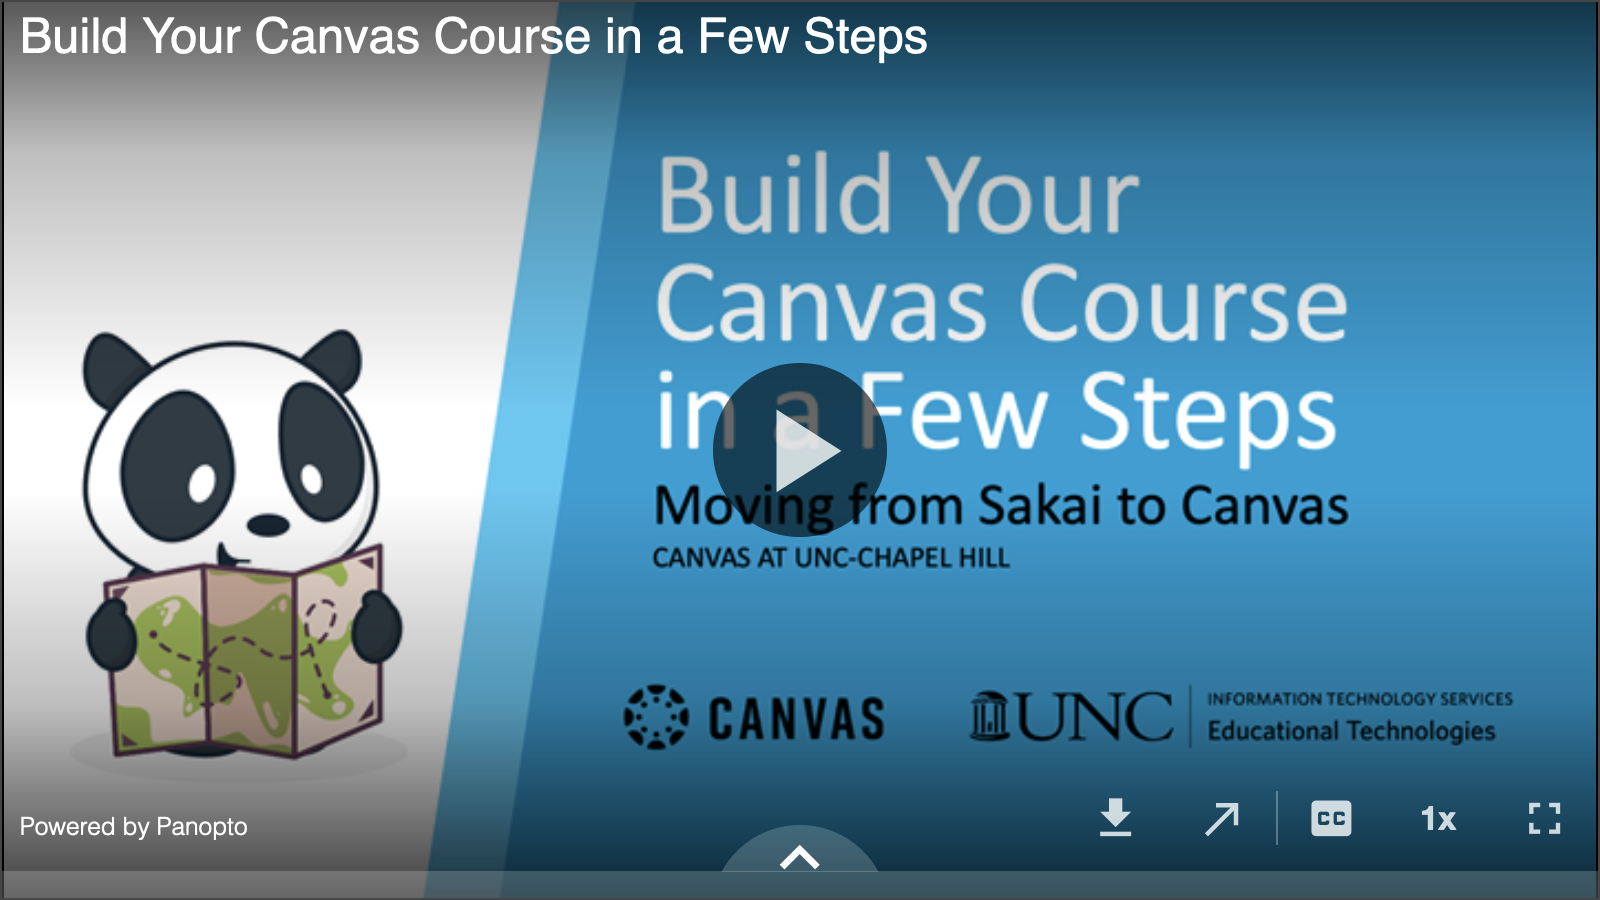 View recording on building your Canvas course in a few steps